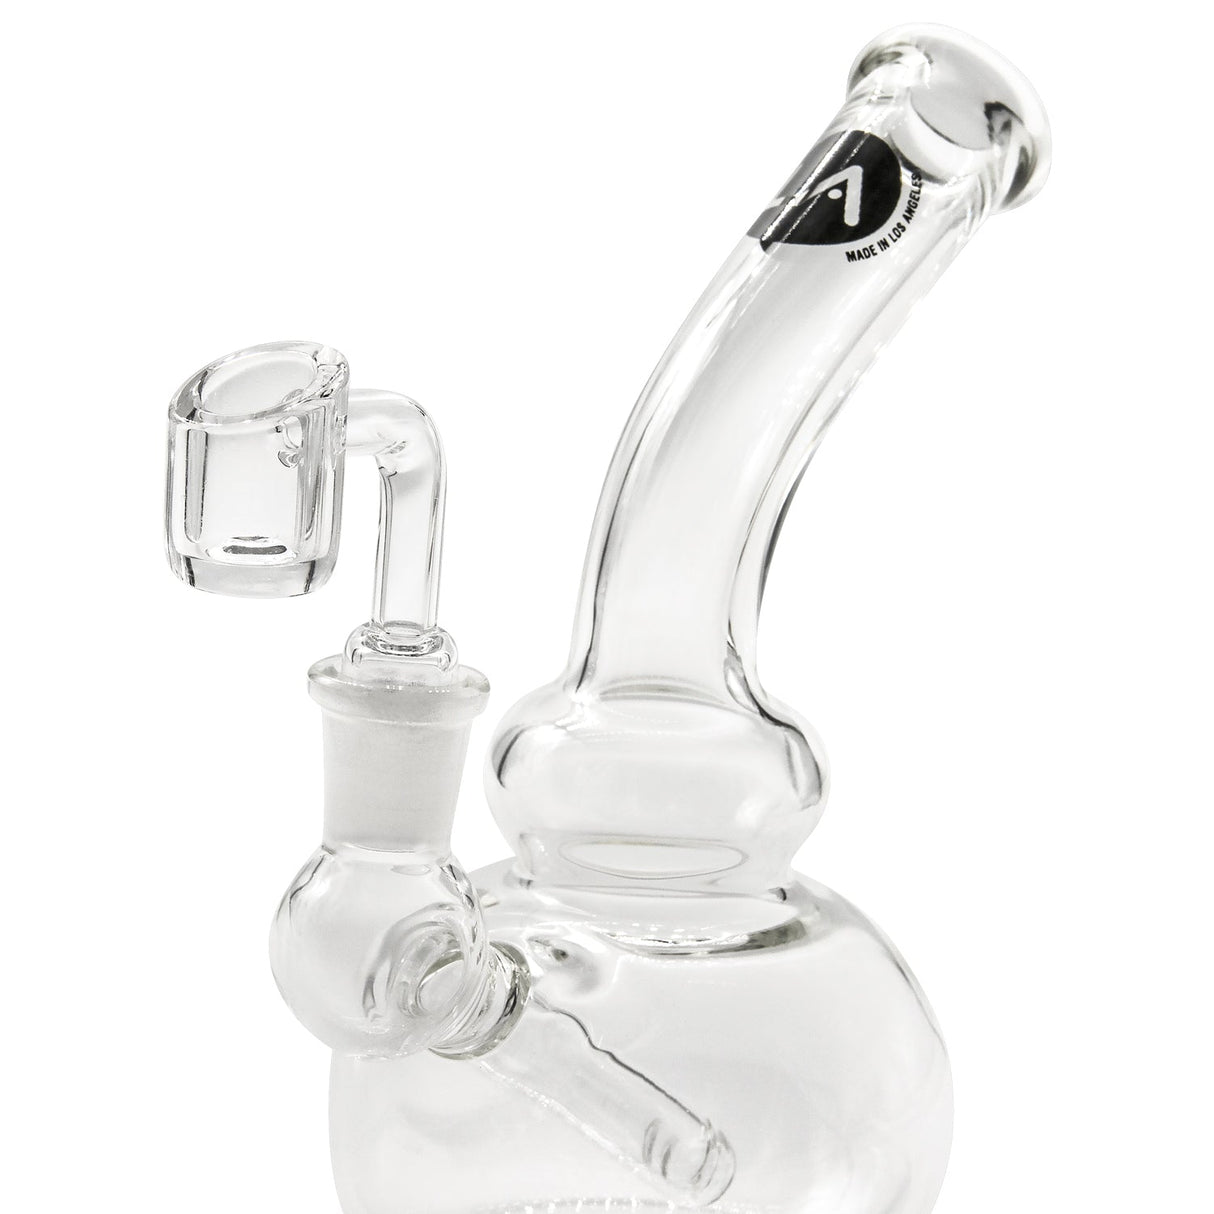 LA Pipes Bubble Concentrate Waterpipe with Quartz Banger, Side View, for Dabbing